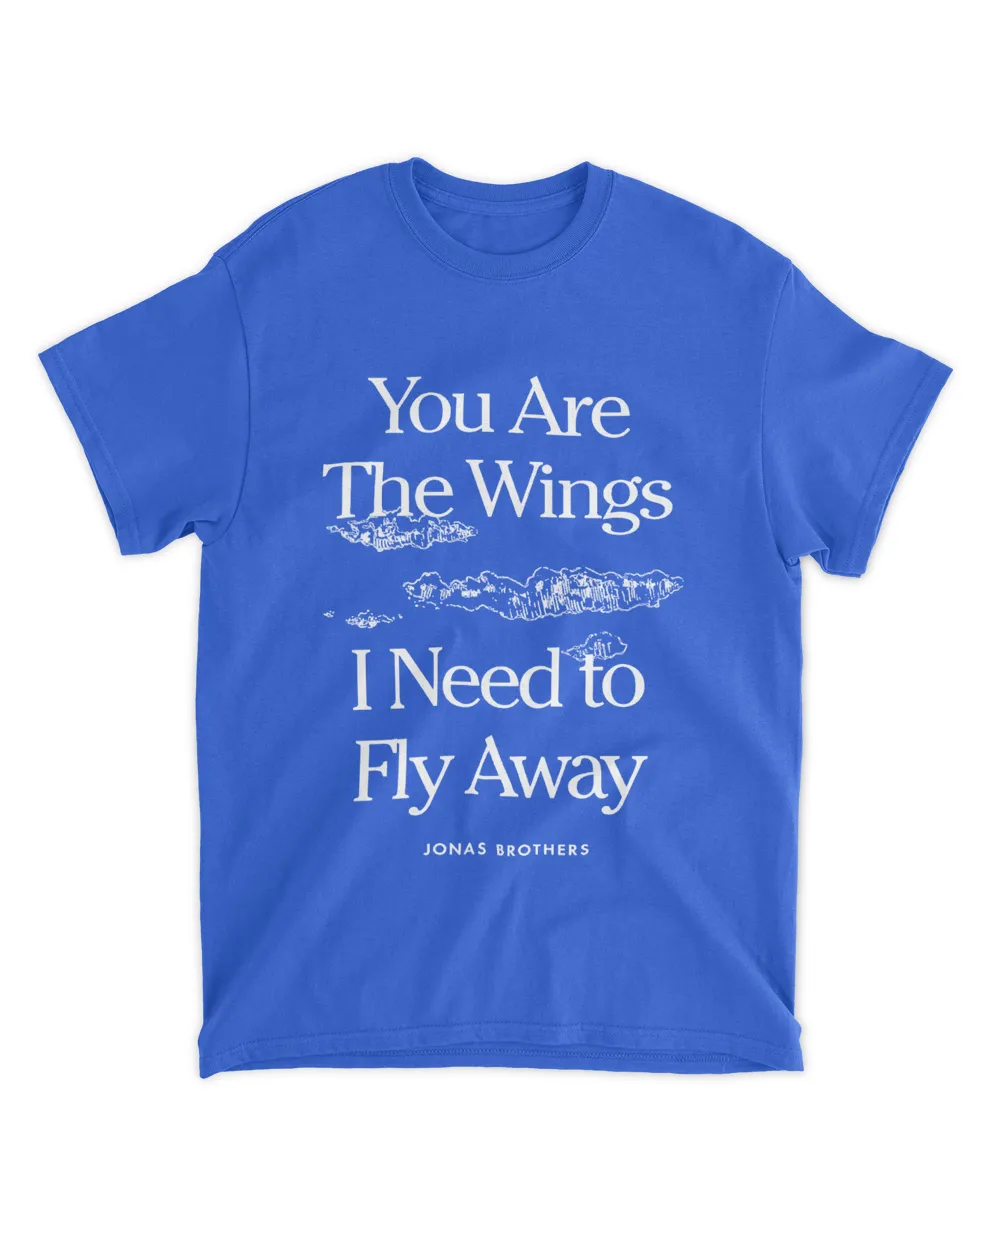 You Are The Wings I Need To Fly Away Jonas Brothers Tee Shirt